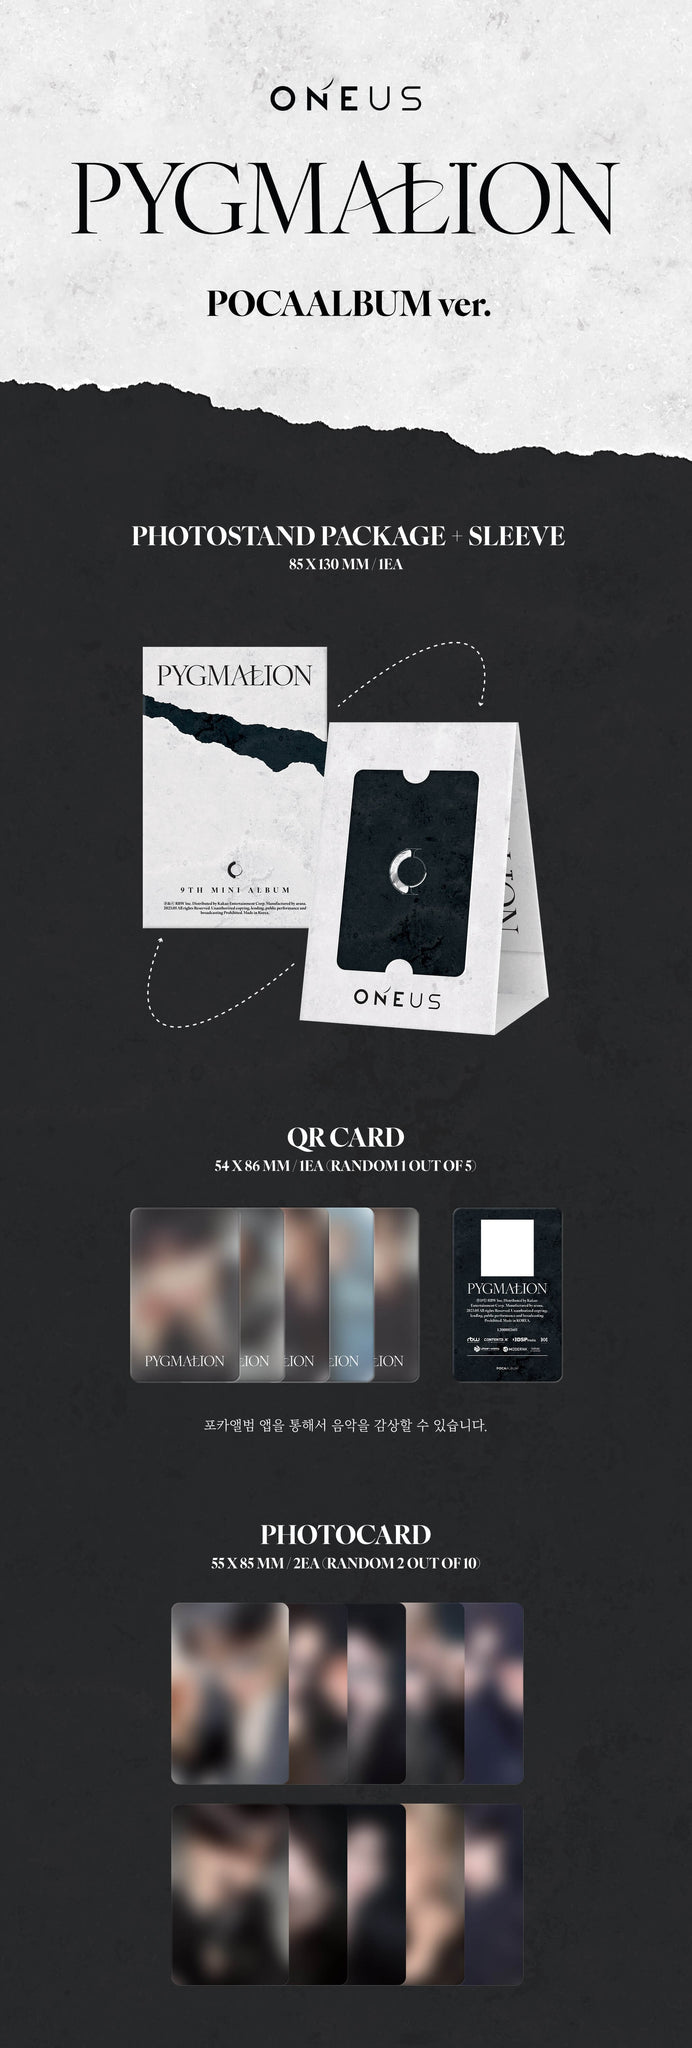 ONEUS PYGMALION - POCA Version Inclusions Photostand Package + Sleeve QR Card Photocards